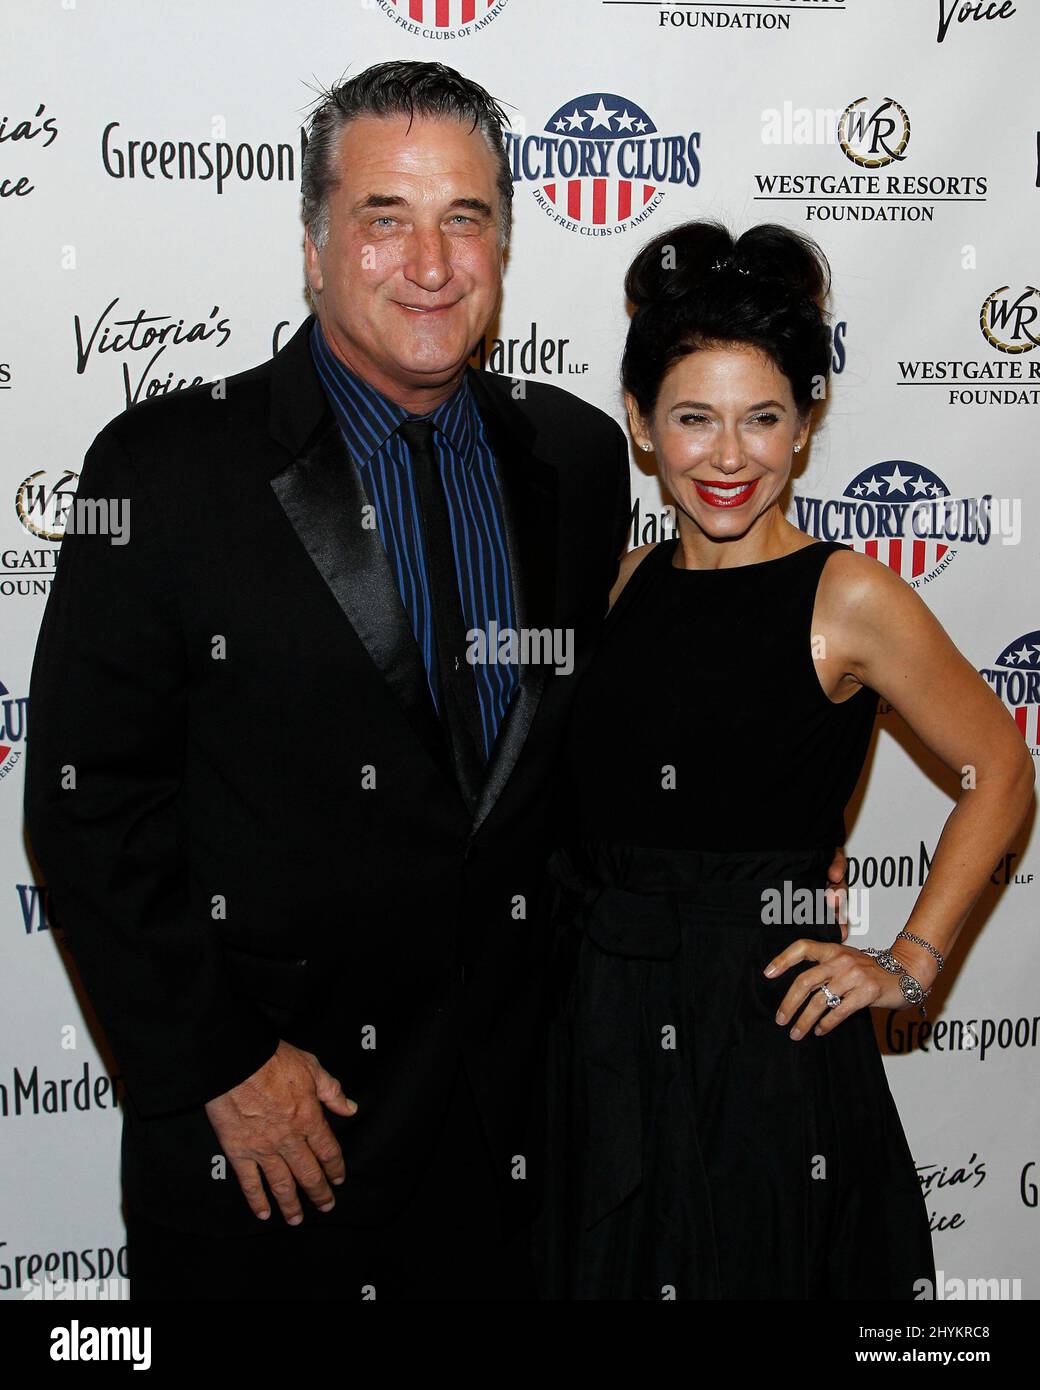 Daniel Baldwin, Elizabeth Baldwin at Victoria's Voice, an evening to save lives presented by the Victoria Siegel Foundation and Greenspoon Marder LLP held at the Westgate Las Vegas Resort & Casino on October 25, 2019 in Las Vegas. Stock Photo